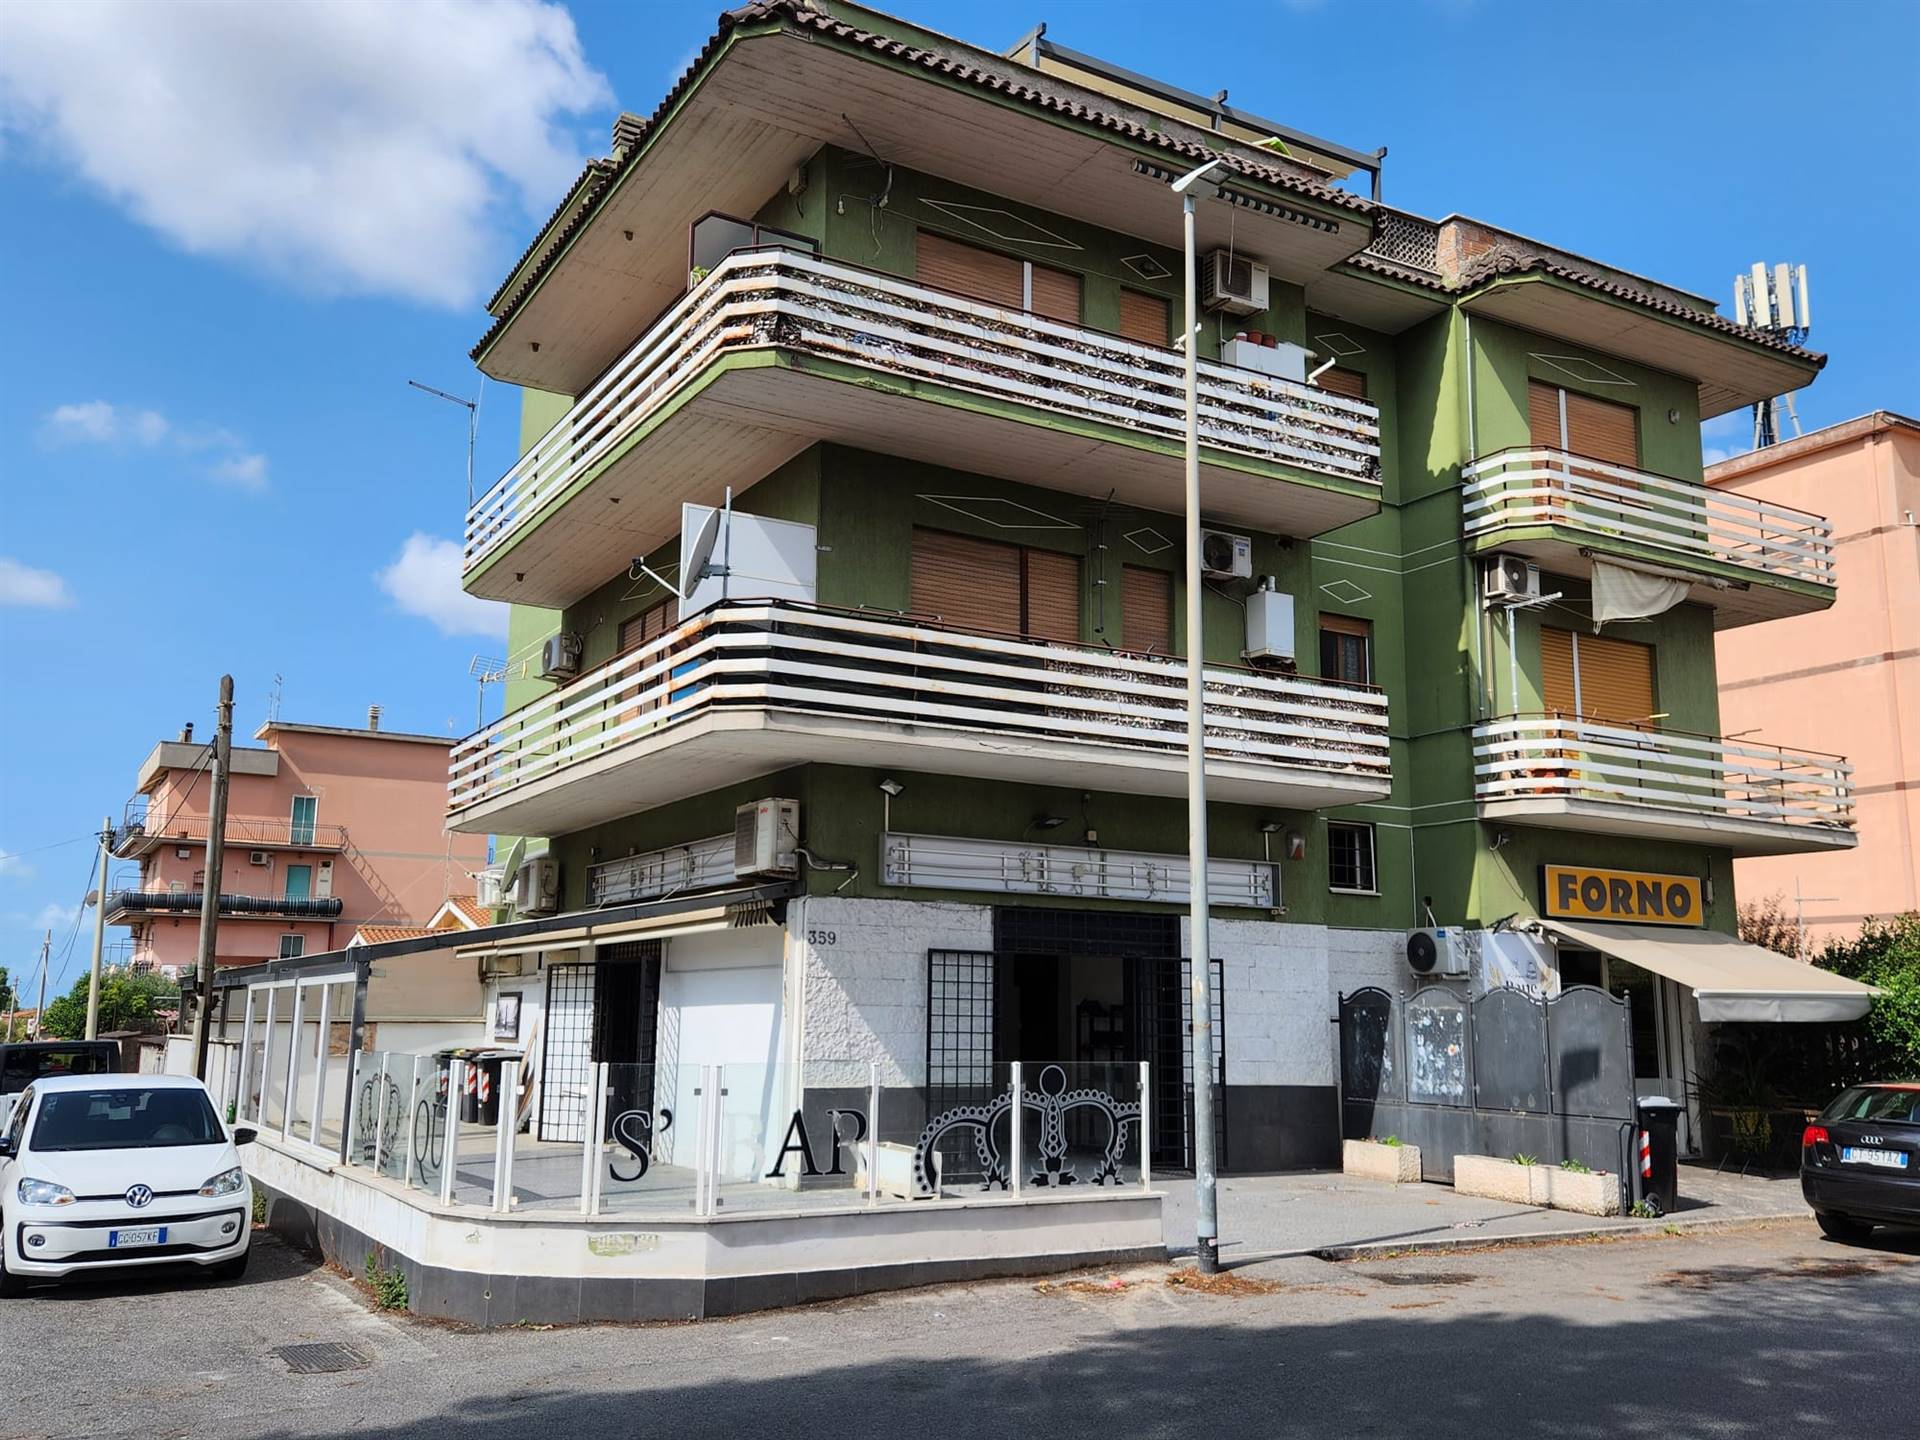 ACILIA, ROMA, Commercial business for rent of 70 Sq. mt., Good condition, Heating Individual heating system, Energetic class: G, placed at Ground, composed by: 1 Room, 1 Bathroom, Price: € 2,500